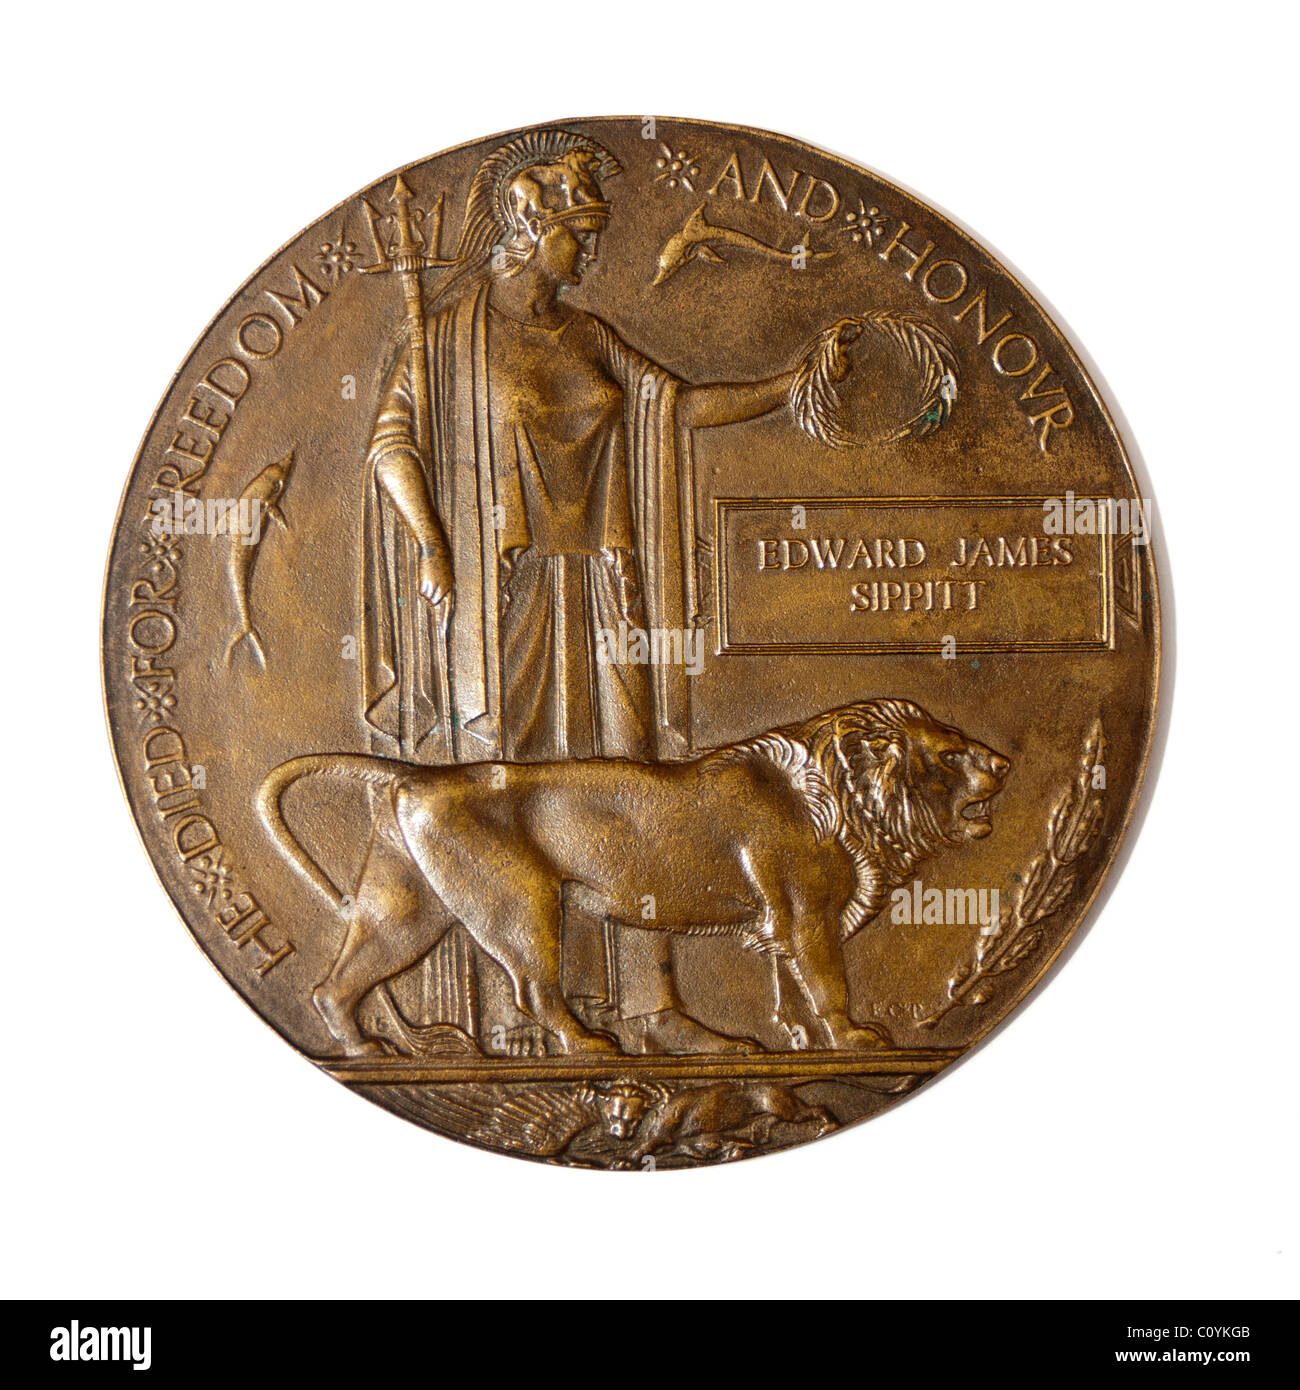 The Great War Memorial Plaque, often referred to at The Dead Man's Penny, was issued after the First World War 1914 - 1918. Stock Photo